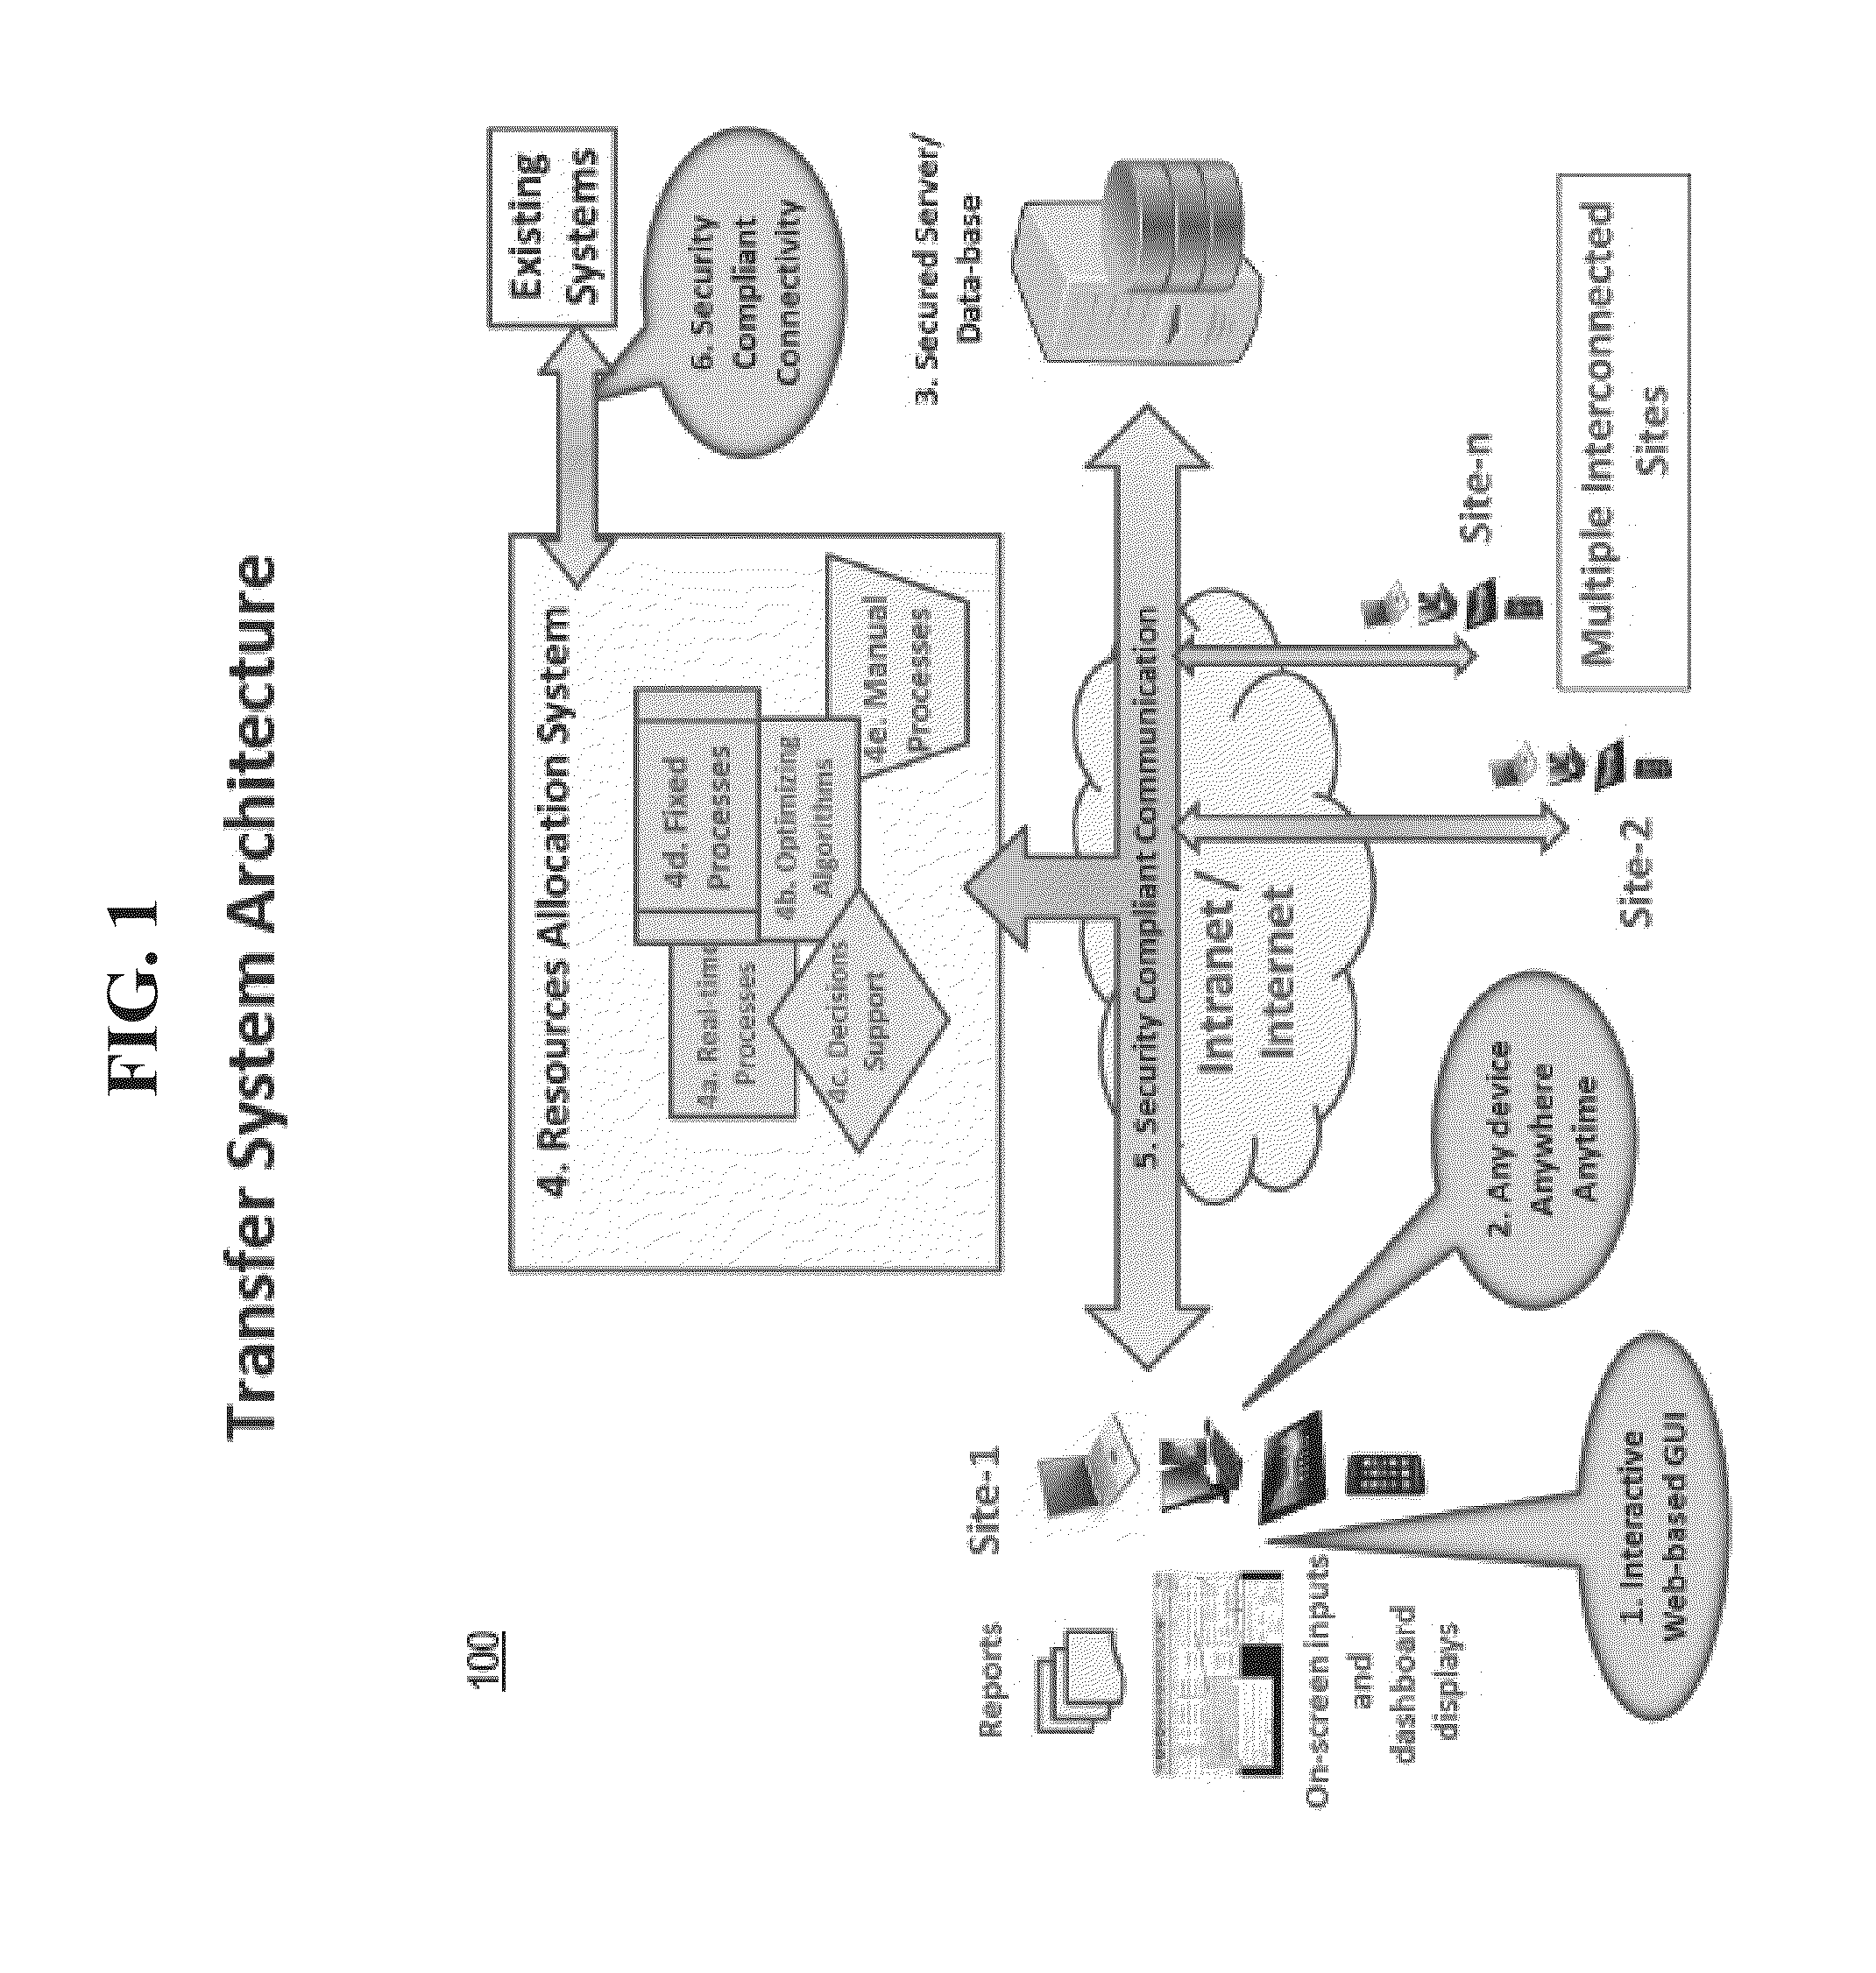 System and method for criteria-based optimized transfer of physical objects or people between different geographic locations including an exemplary embodiment for patients transfer between health care facilities